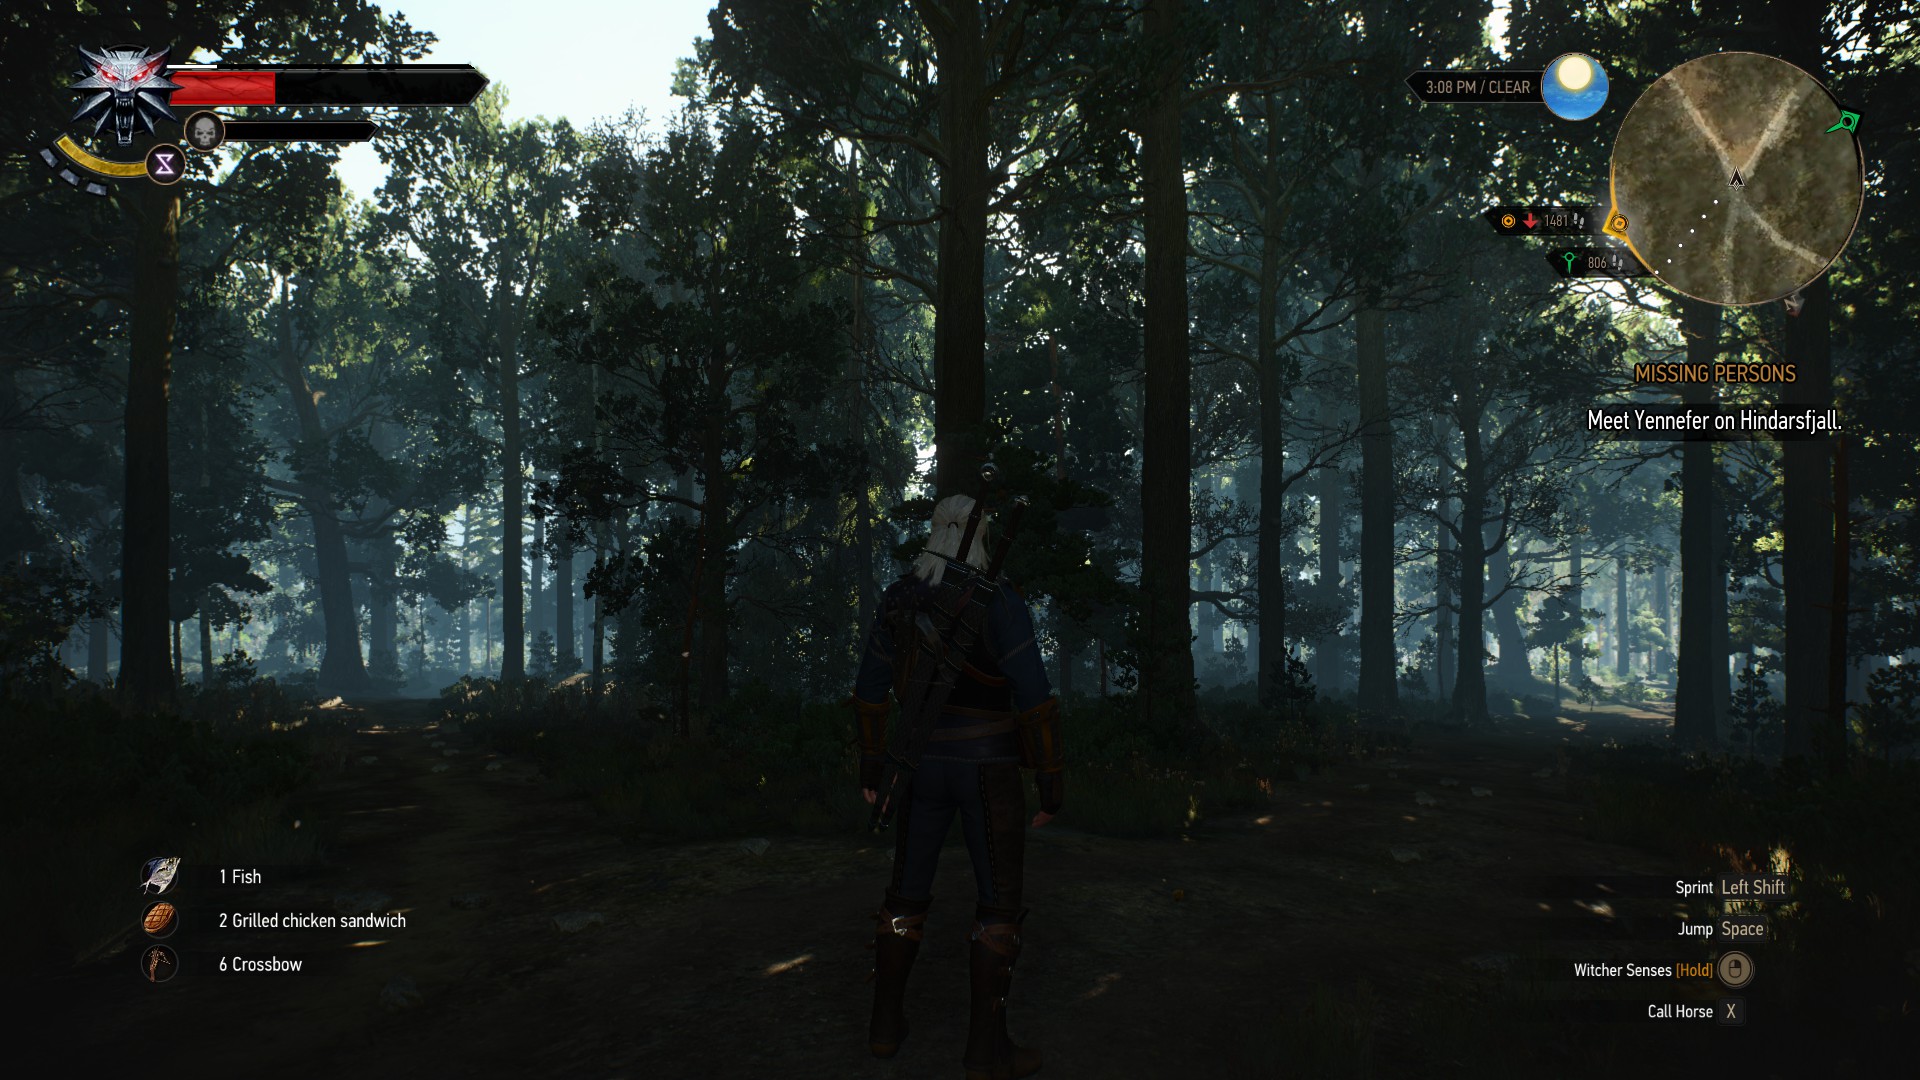 The Witcher 3 is the first game where you actually feel like you're in a forest